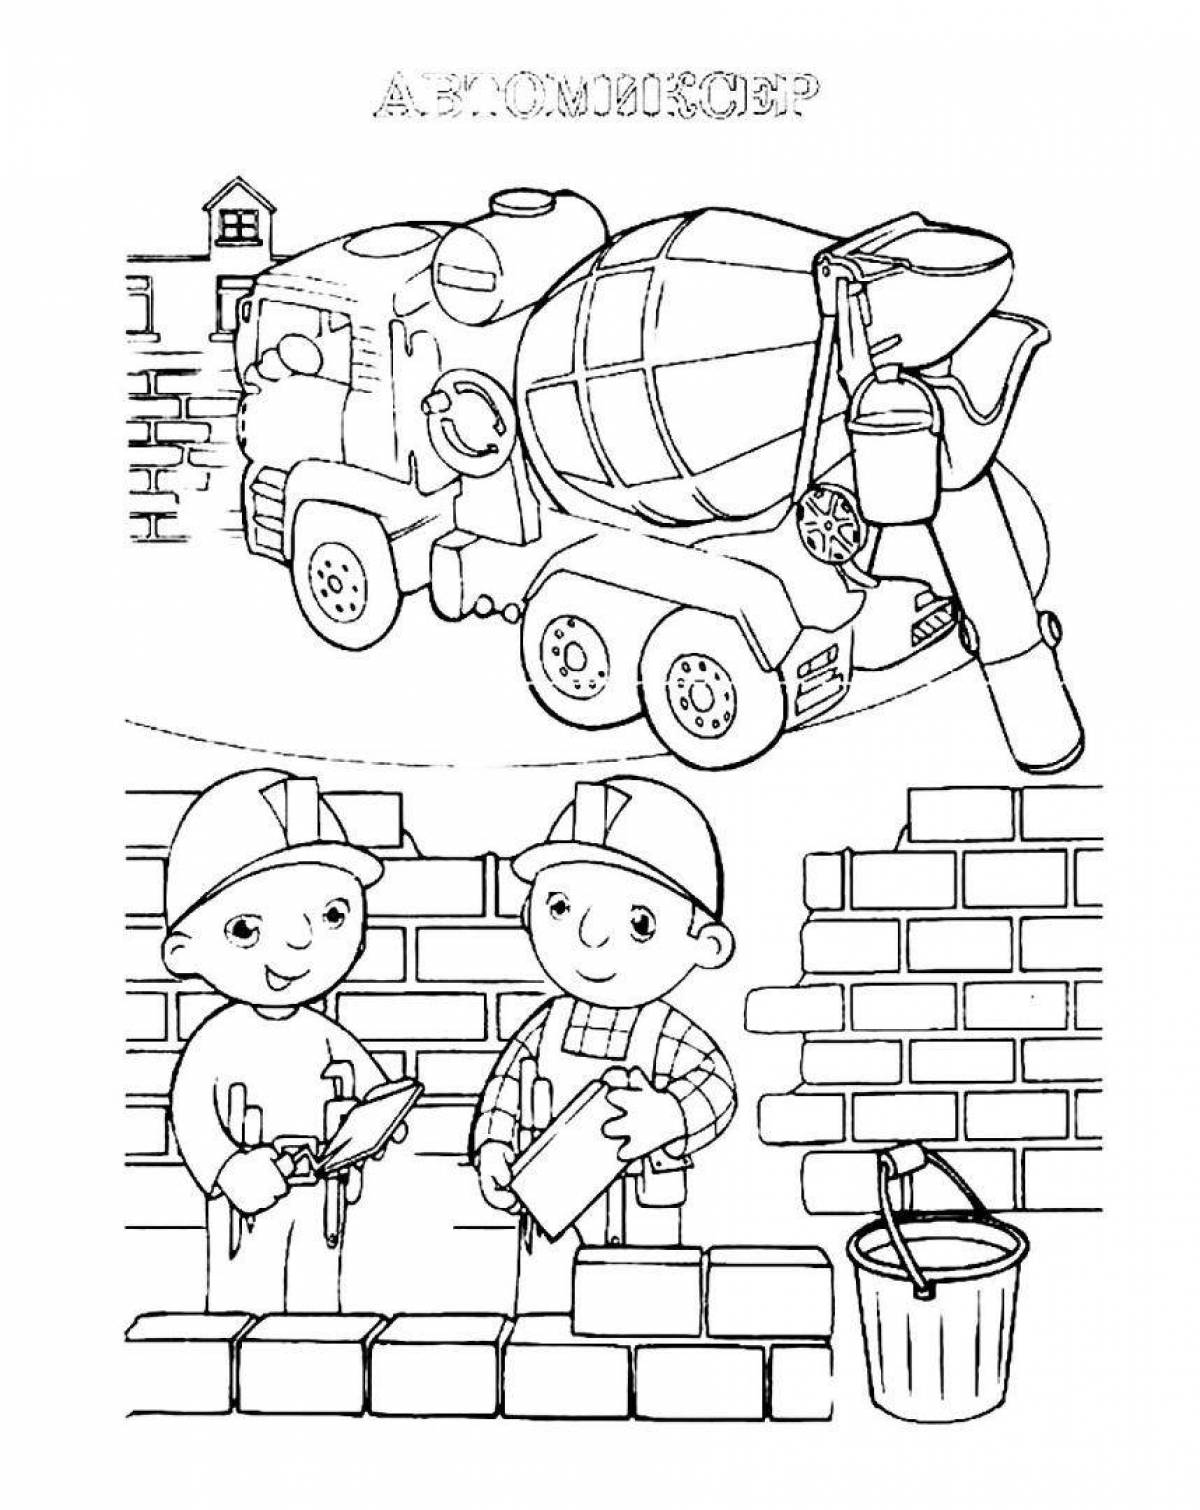 Bright builder coloring for kids